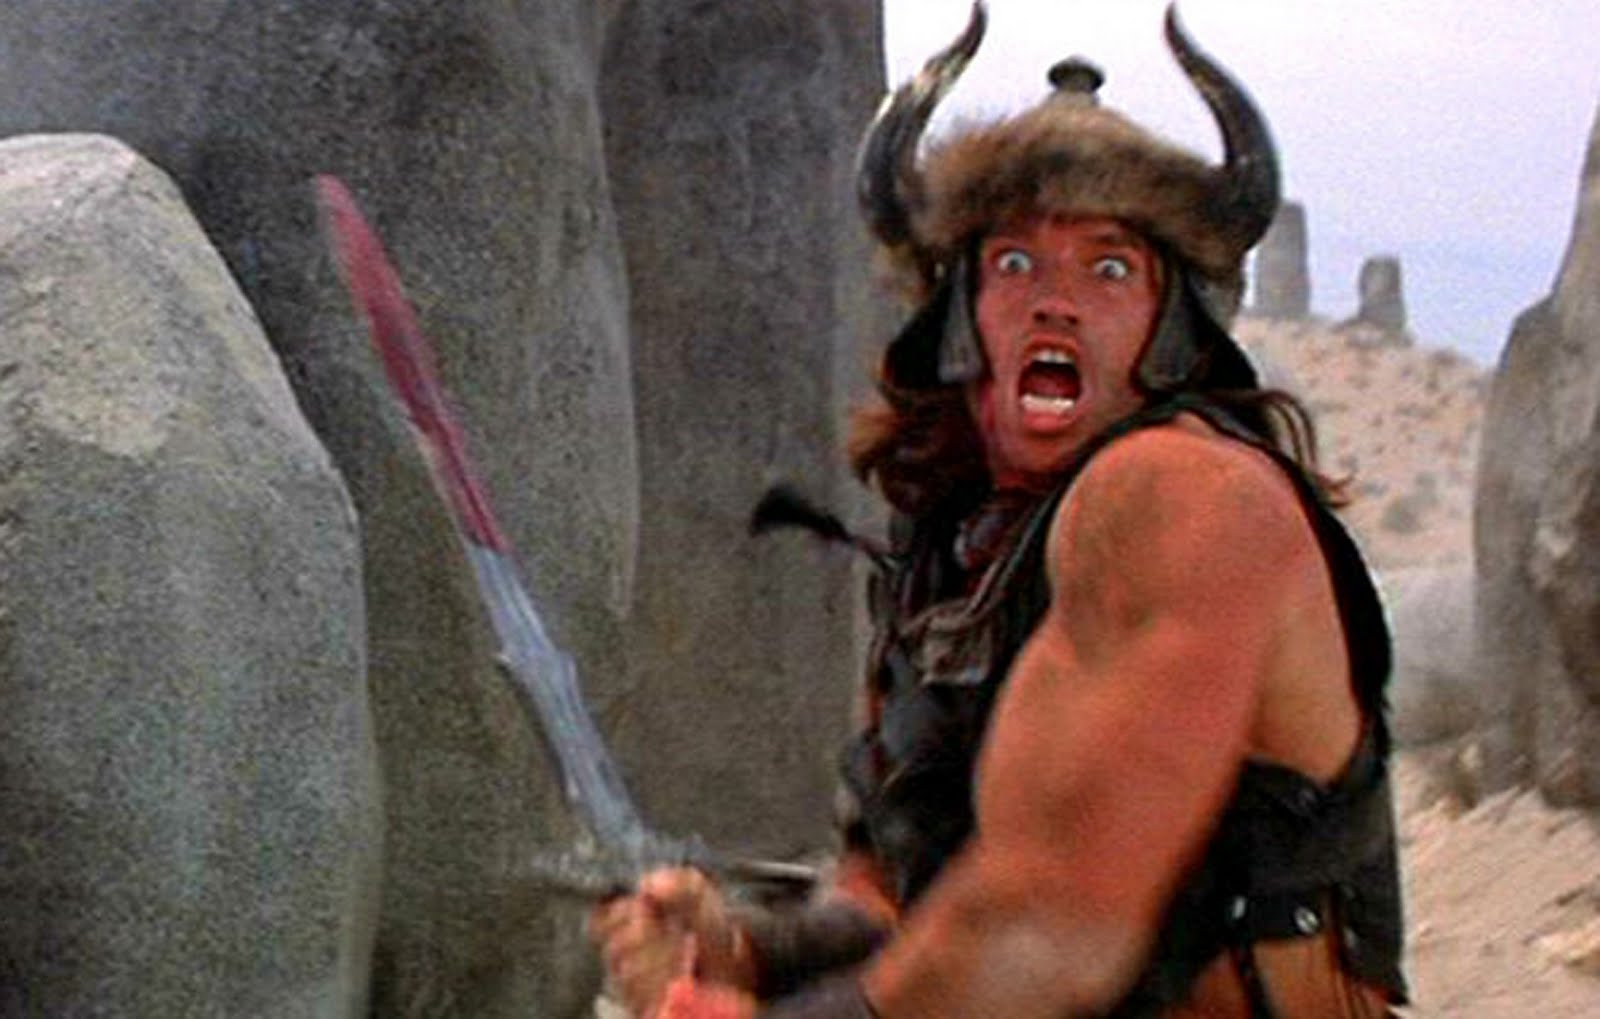 Conan The Barbarian Backgrounds, Compatible - PC, Mobile, Gadgets| 1600x1019 px